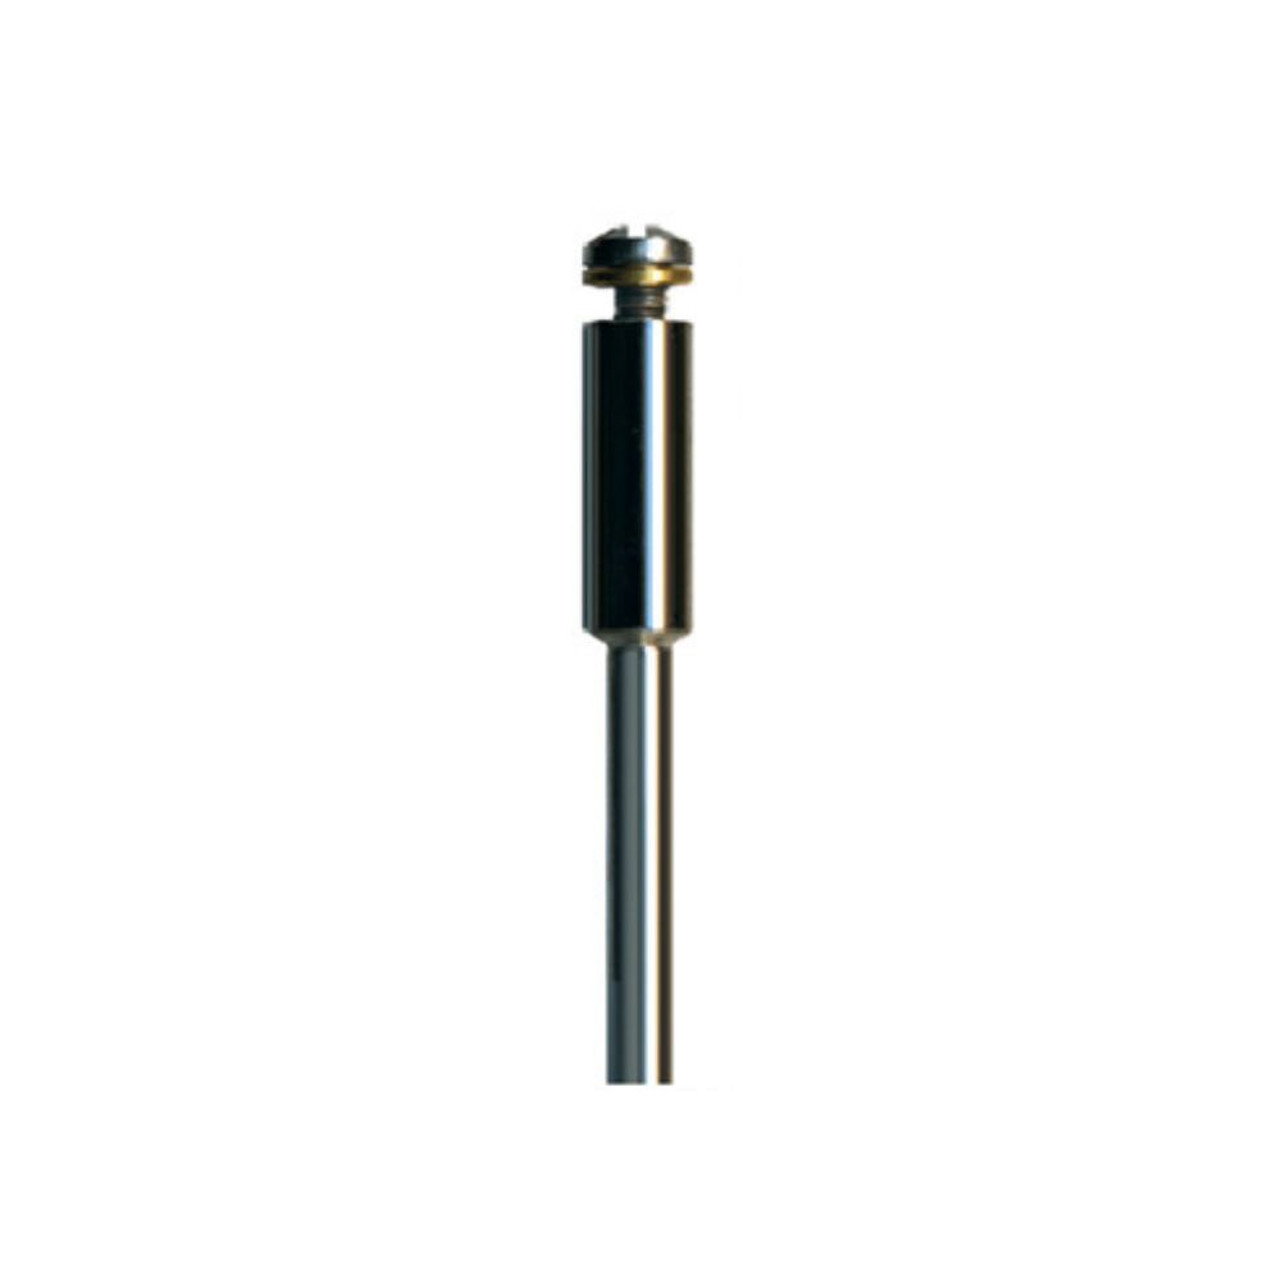 Foredom A-M20 Screw Type Mandrel Shank - 3.17mm (1/8") 106-A-M20